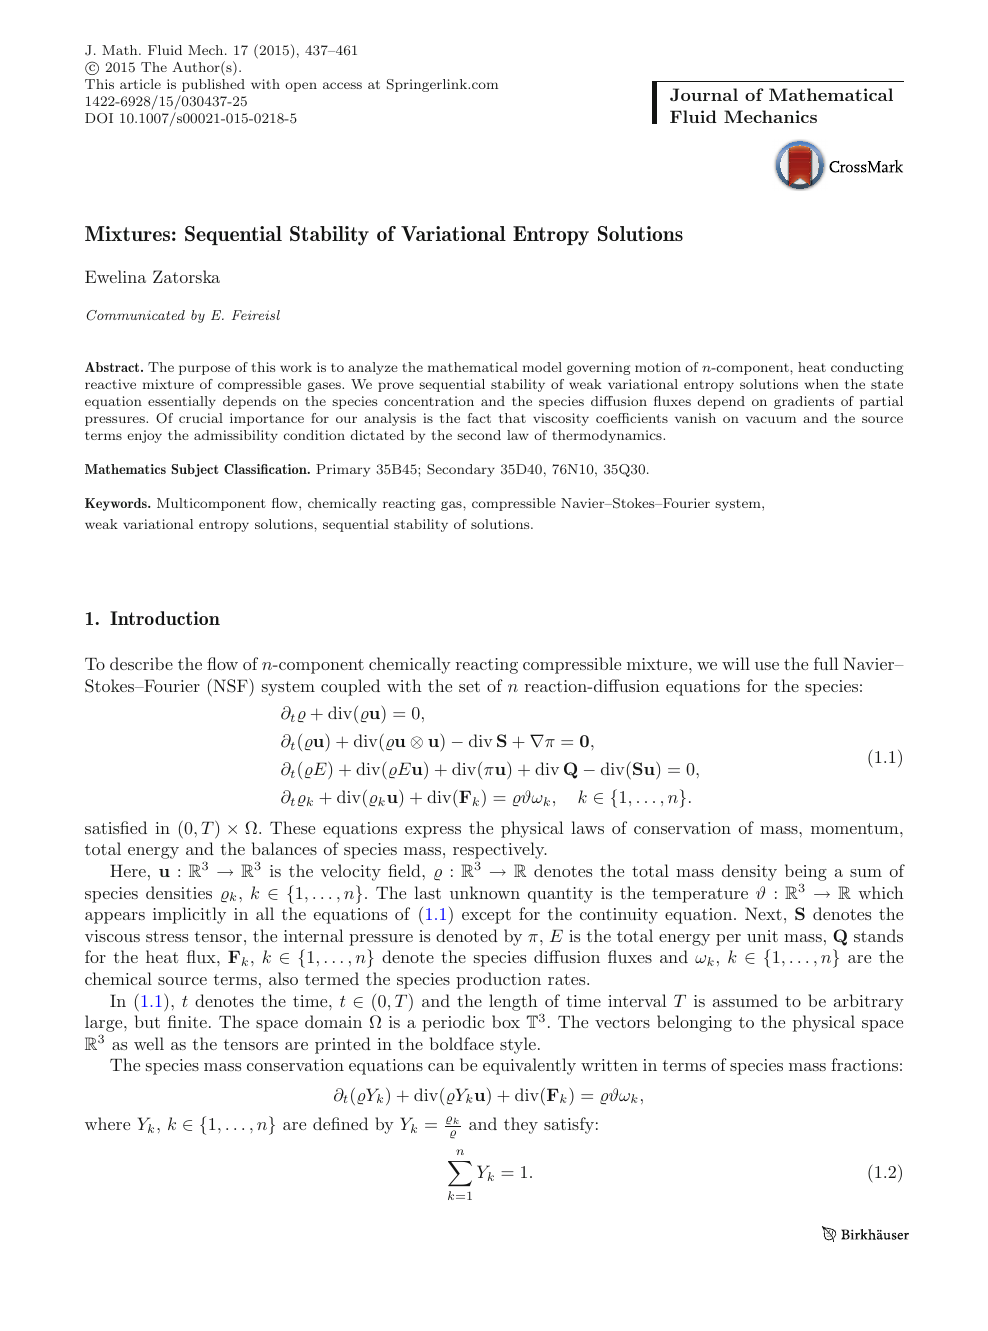 Mixtures Sequential Stability Of Variational Entropy Solutions Topic Of Research Paper In Mathematics Download Scholarly Article Pdf And Read For Free On Cyberleninka Open Science Hub